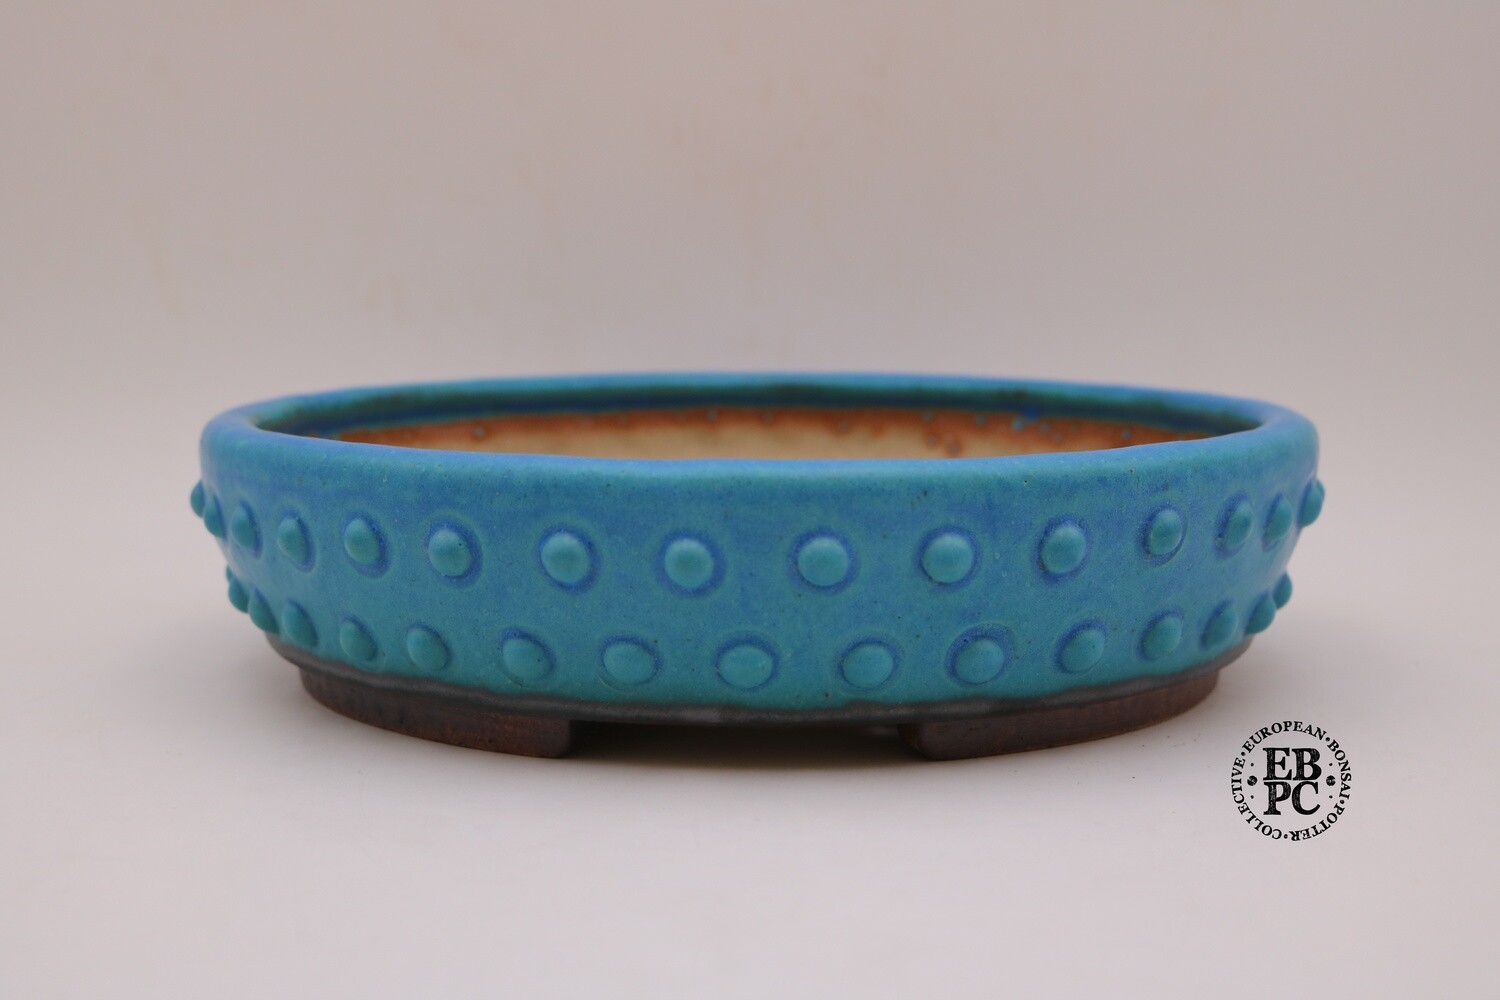 SOLD - Ian Baillie - 30cm; Glazed; Round; Vibrant Turquoise blue; Drum-style Design; Recessed feet